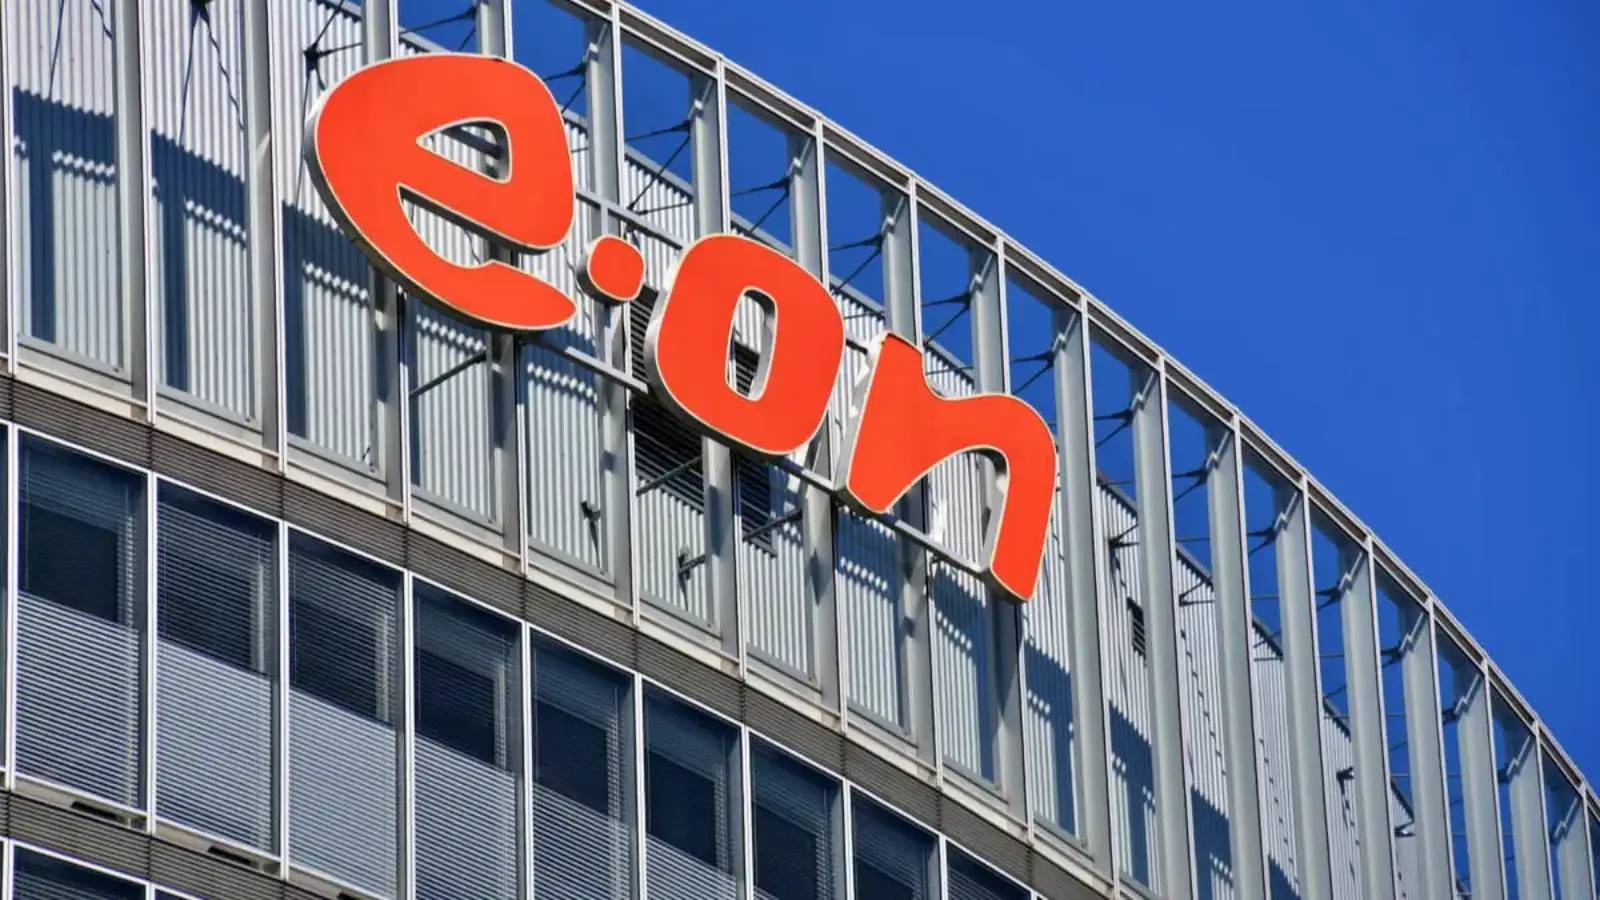 E.ON Customers See IMPORTANT NOTICE Invoices